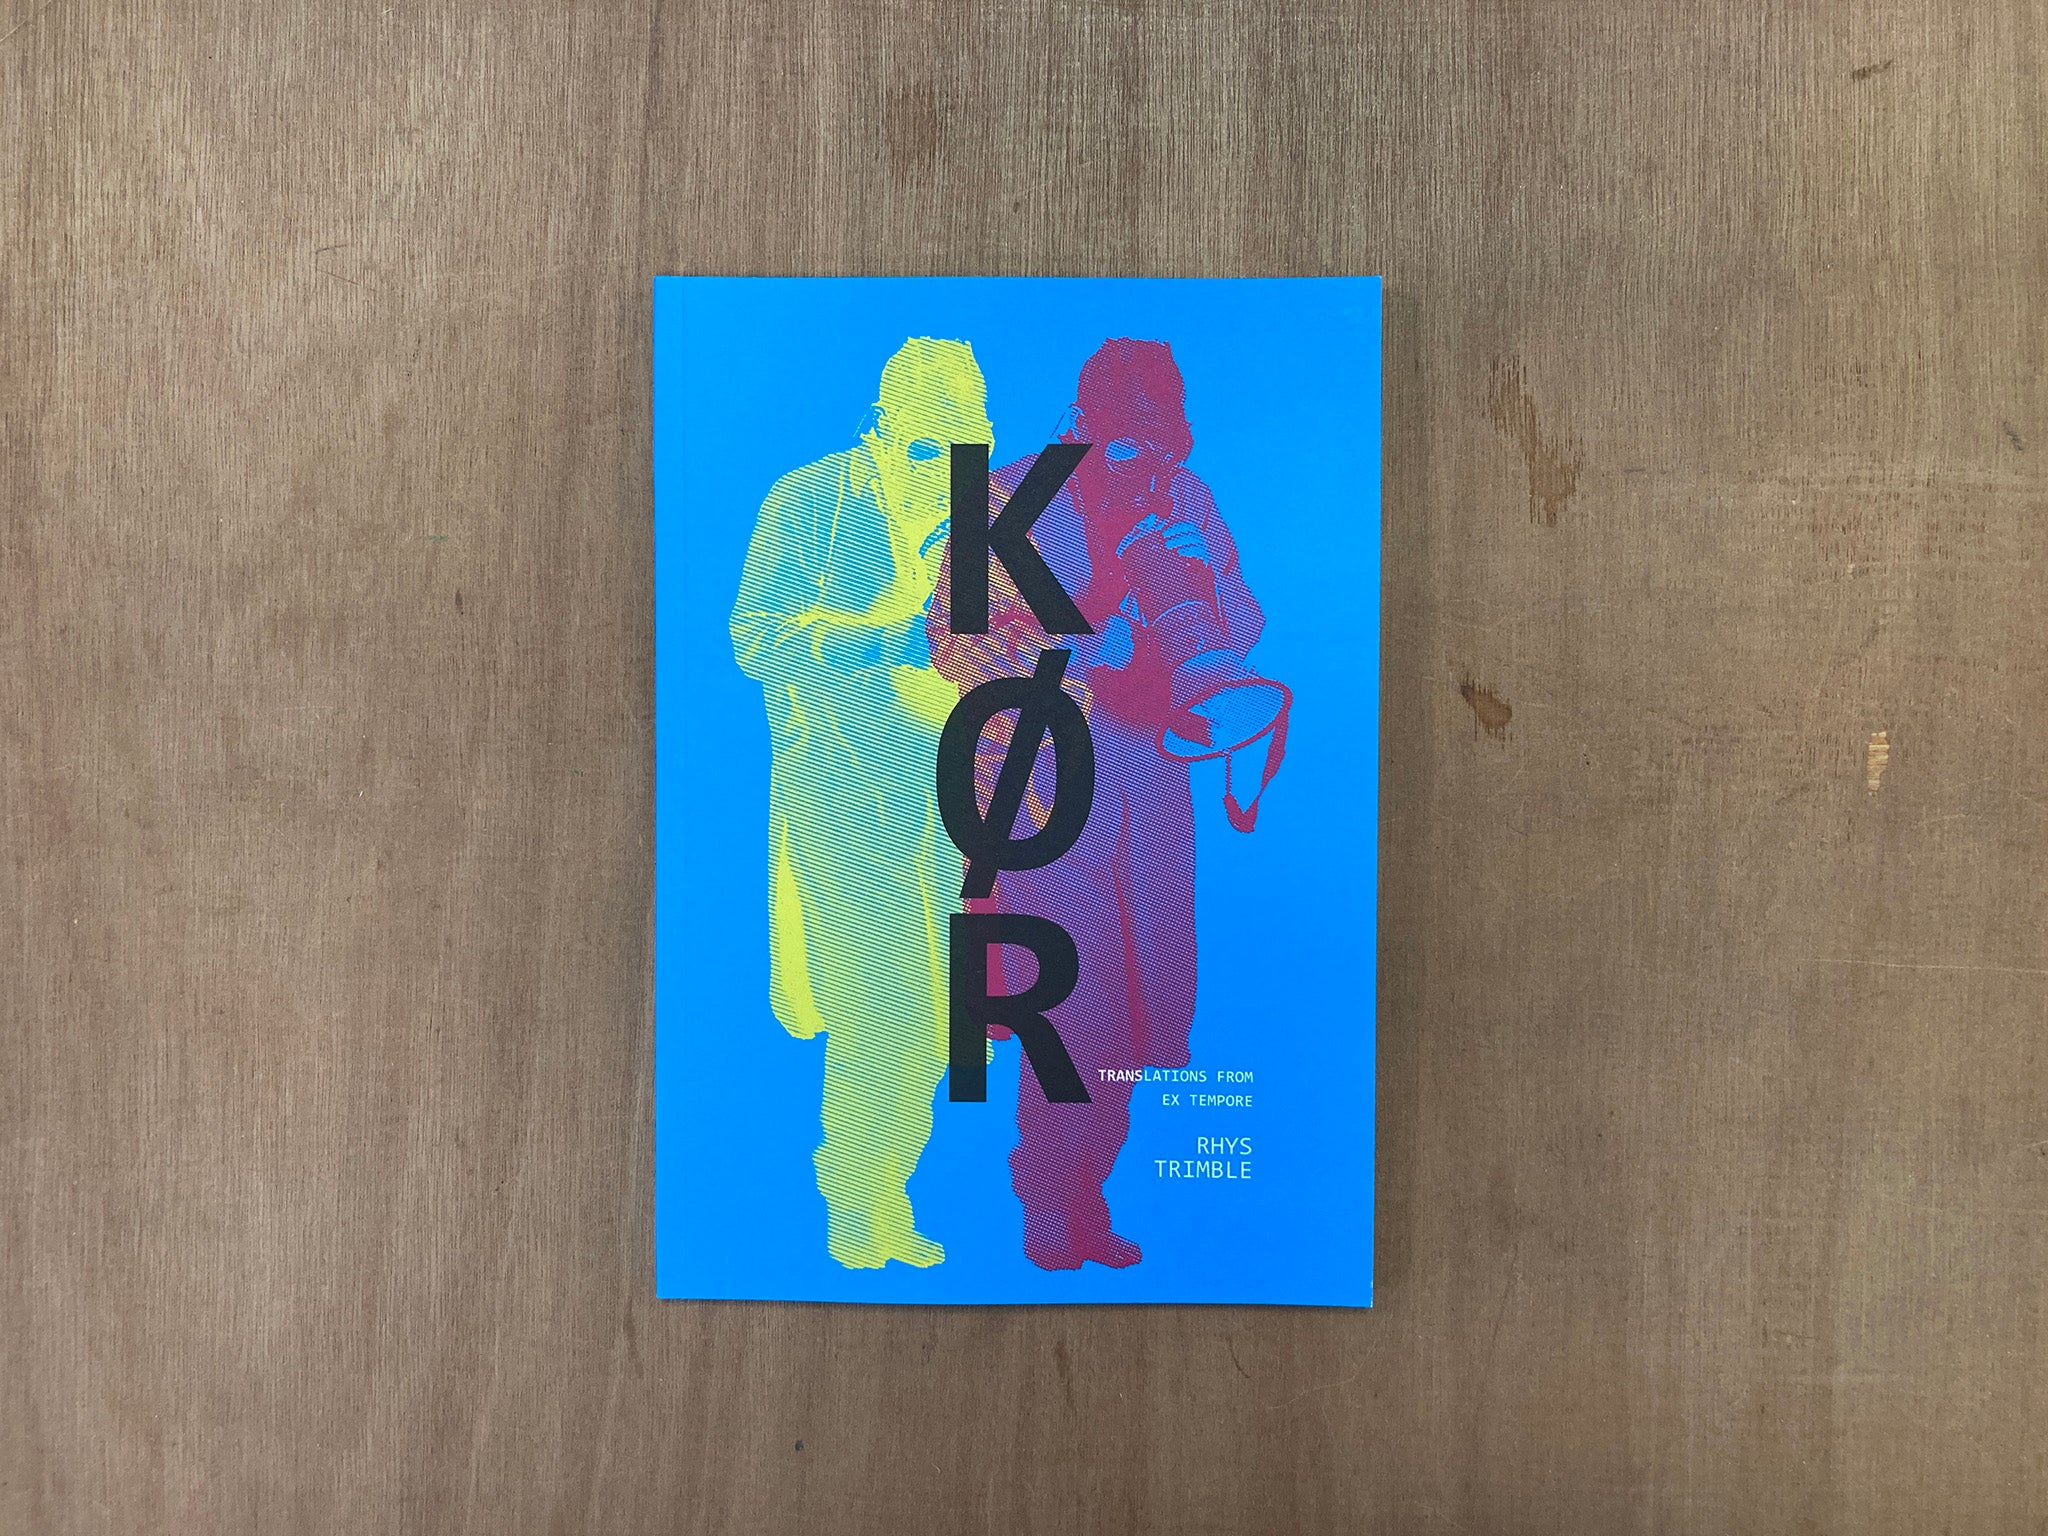 KØR, TRANSLATIONS FROM EX TEMPORE by Rhys Trimble